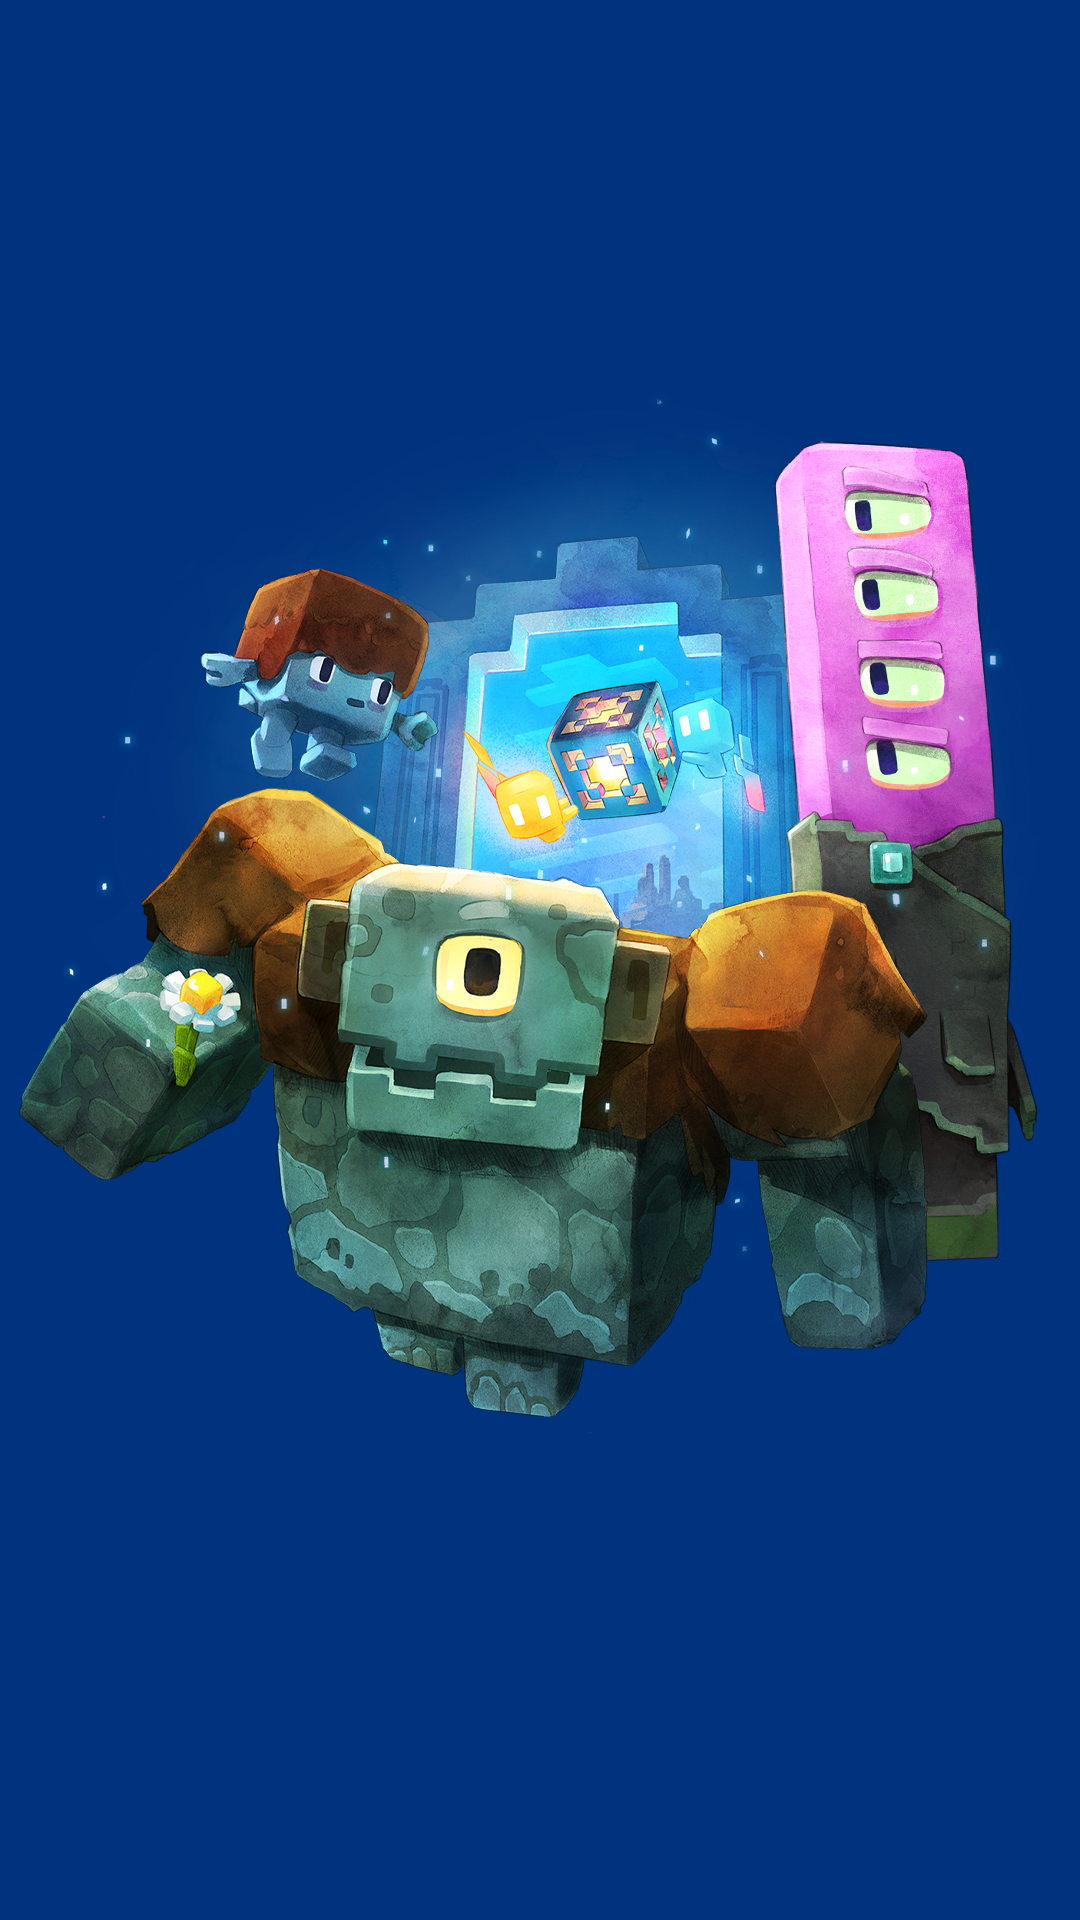 Minecraft Legends themed phone wallpaper featuring iconic in-game elements against a deep blue background.